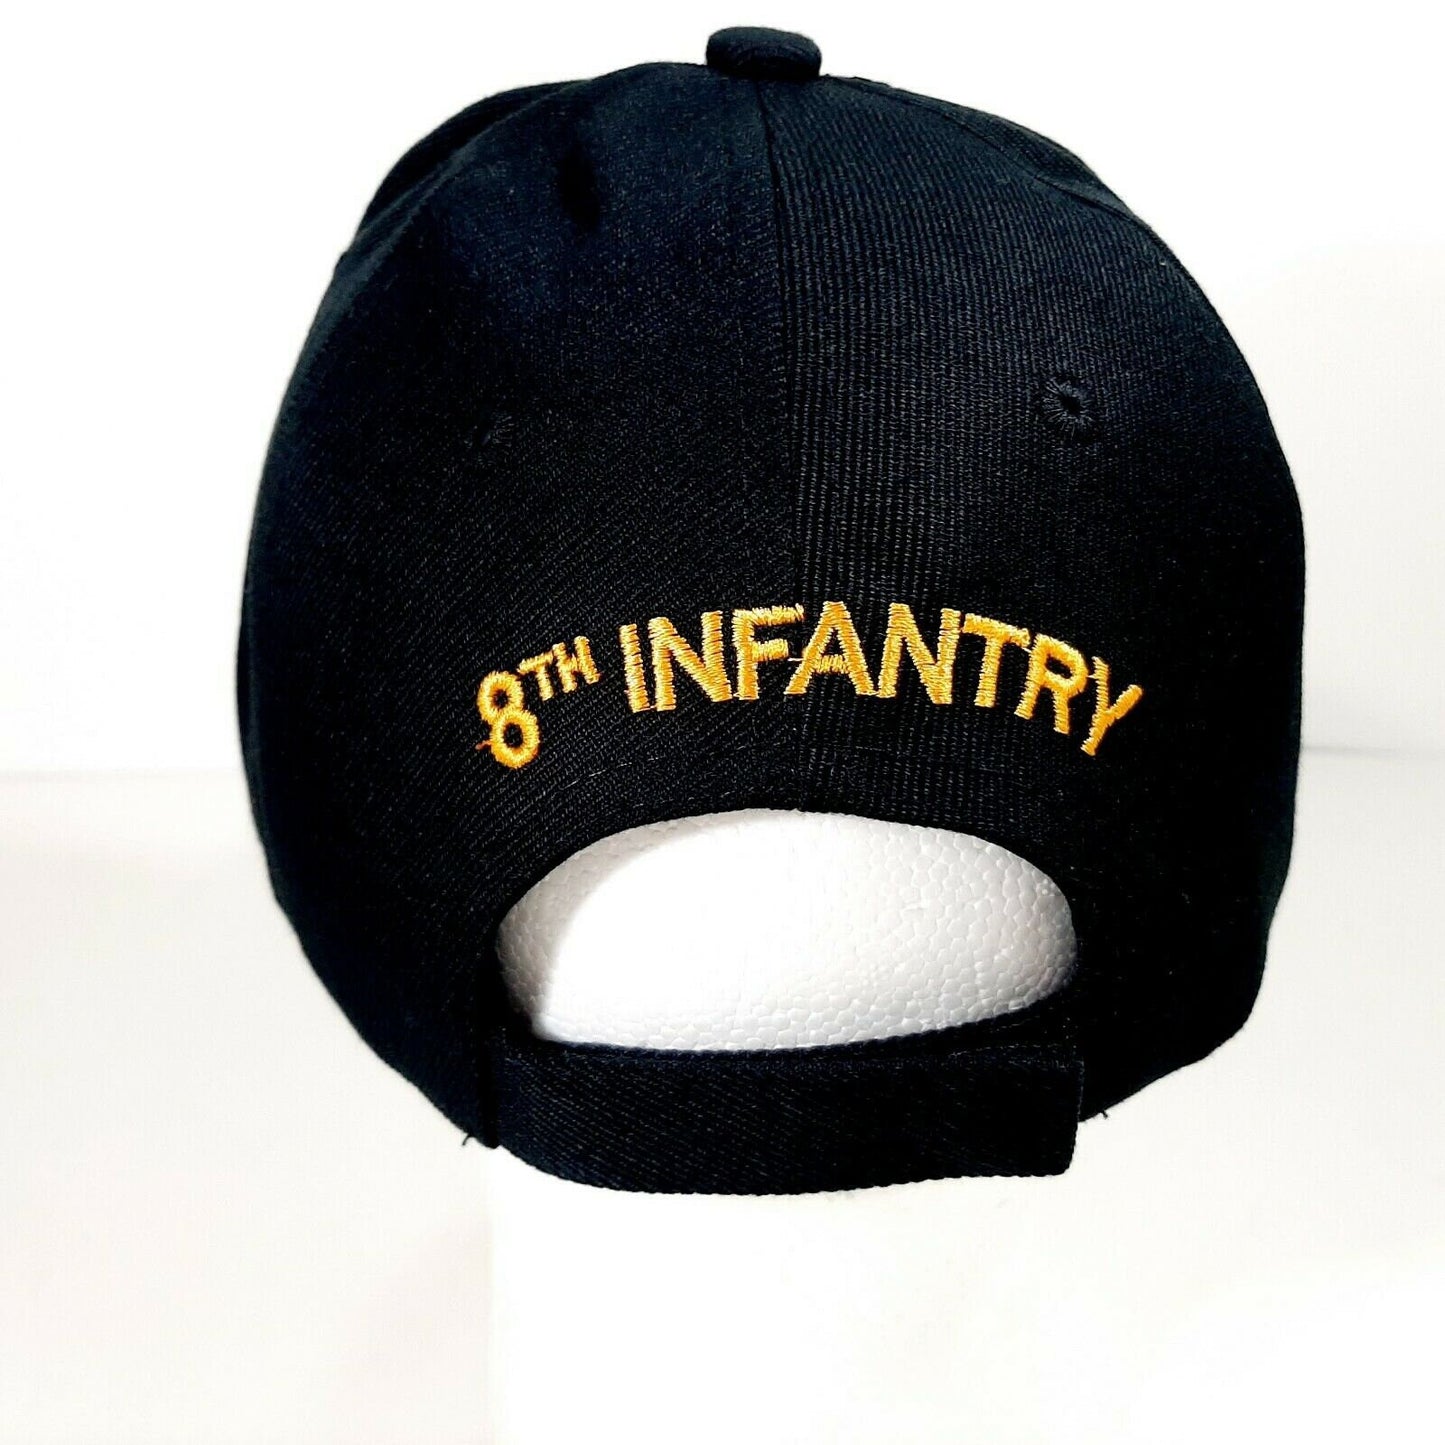 US Army 8th Infantry Division Men's Ball Cap Hat One Size Black Acrylic